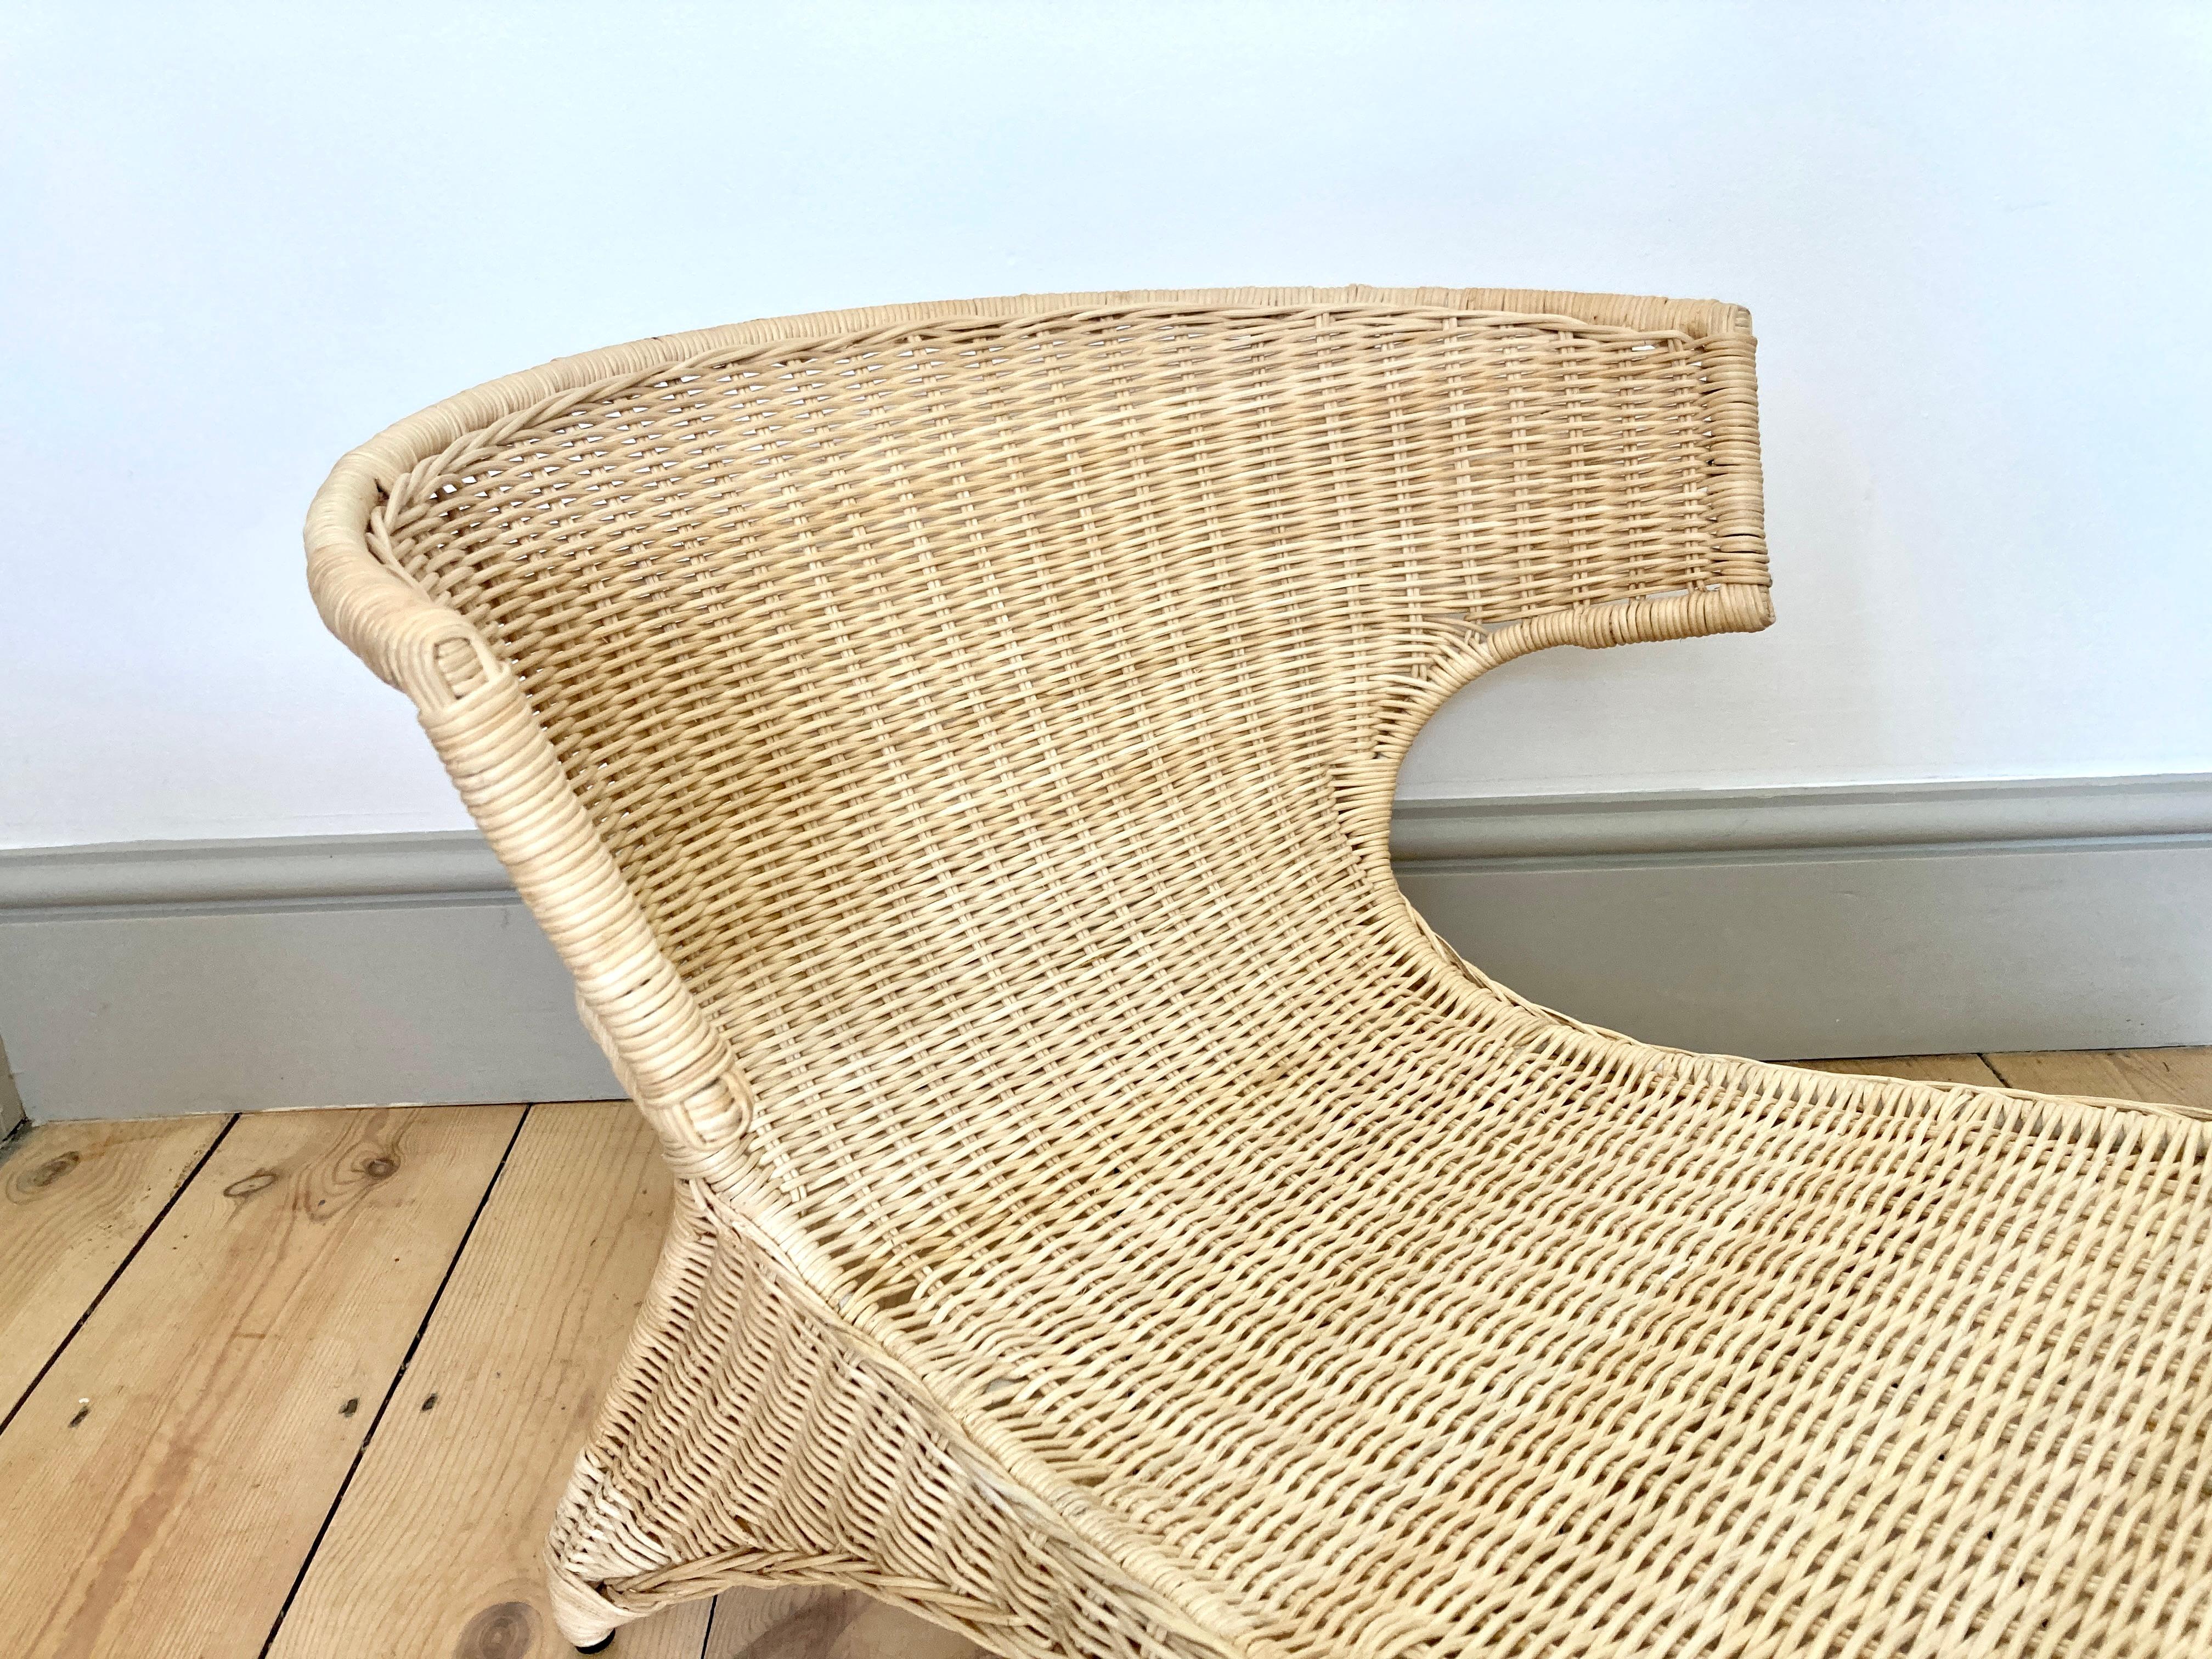 Low Lounge Chair / Chaise Longue by Monika Mulder for Ikea Savo Natural Rattan 3